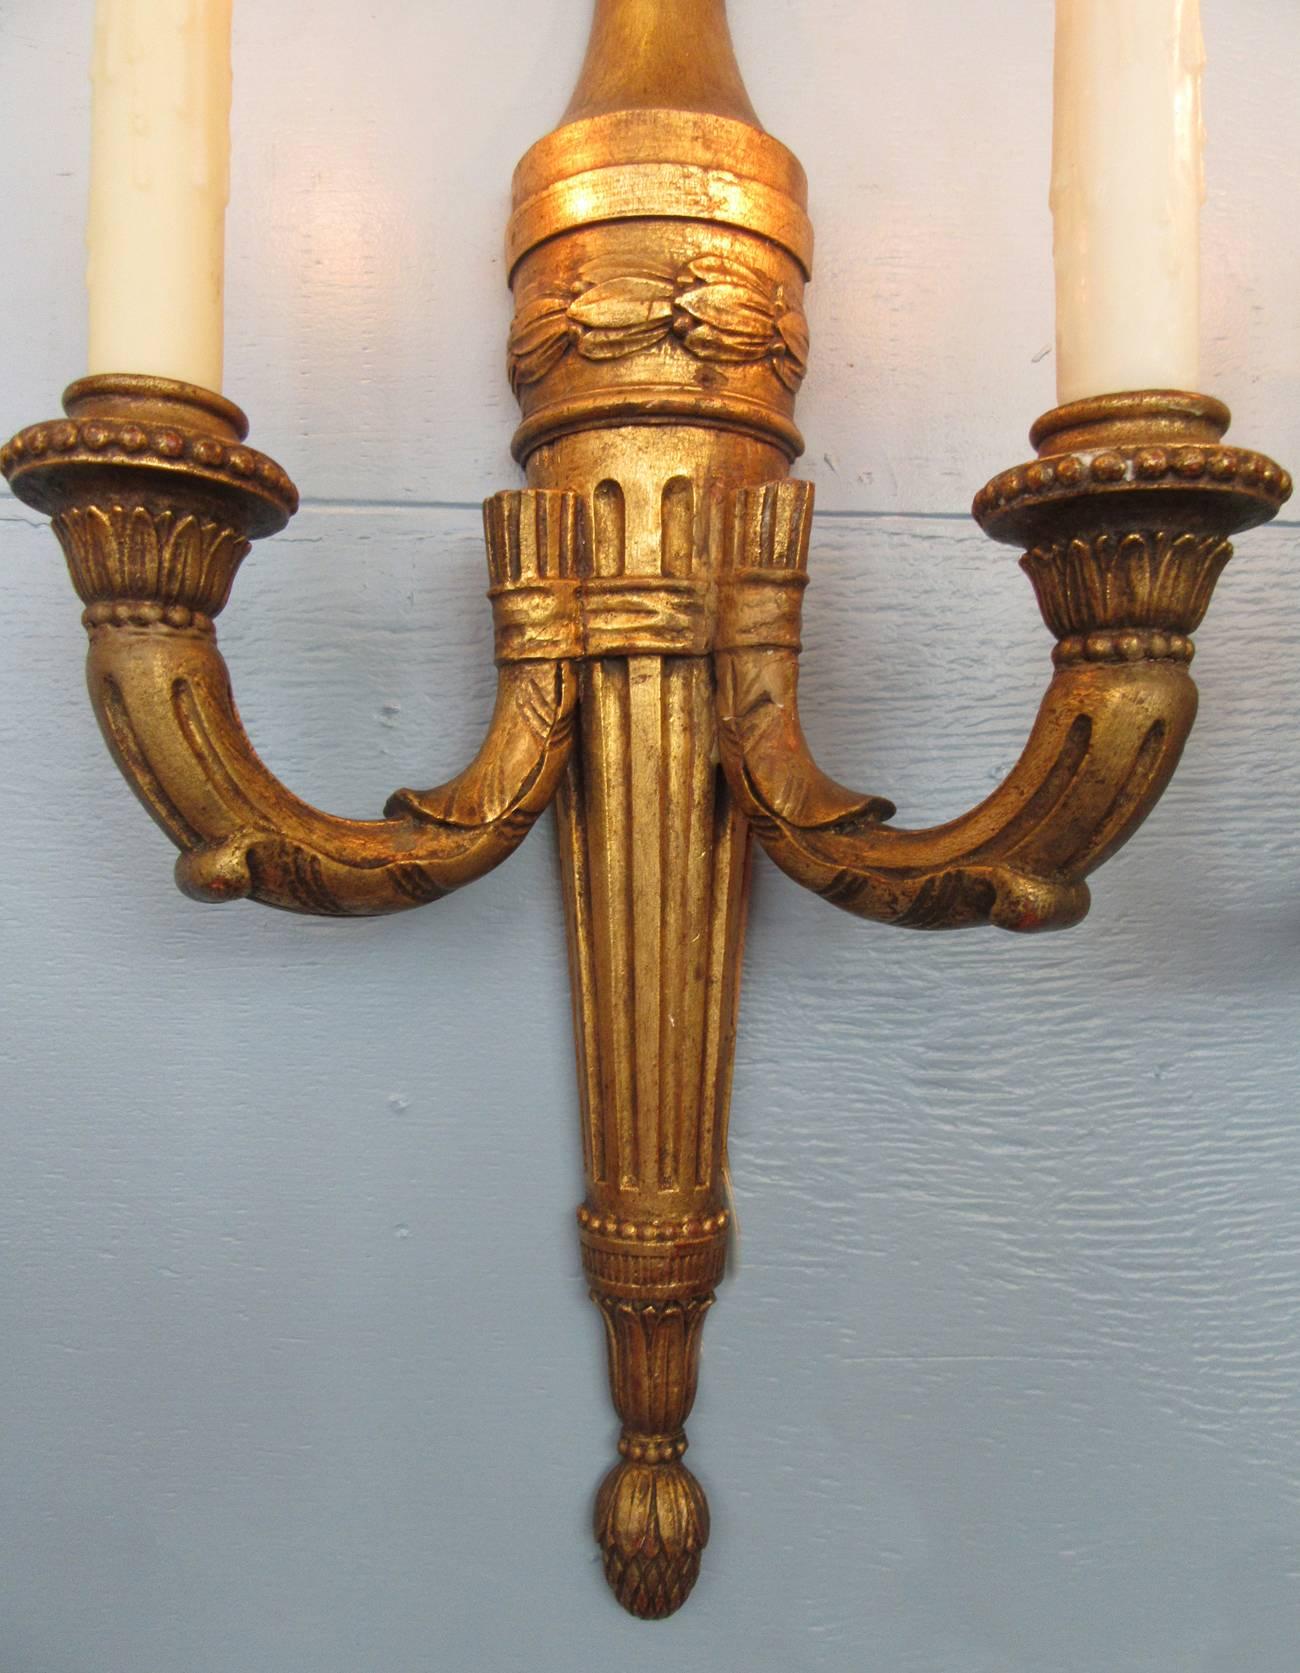 Pair of Early 20th Century Italian Neoclassical Giltwood Torchiere Sconces 1